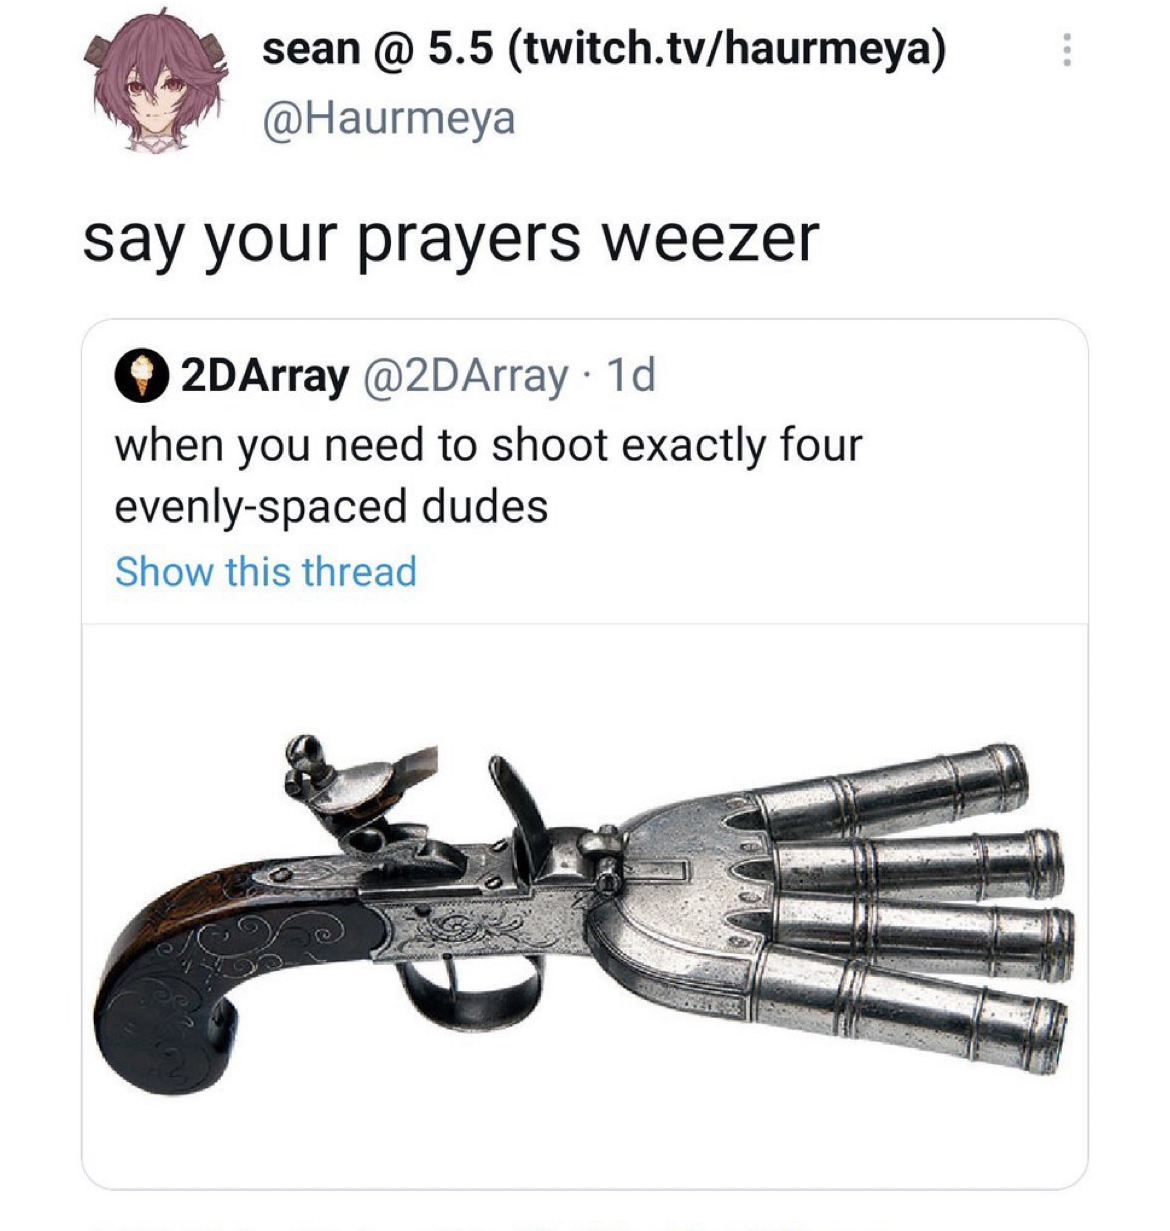 savage tweets - you need to shoot 4 evenly spaced dudes - sean @ 5.5 twitch.tvhaurmeya say your prayers weezer 2DArray 1d when you need to shoot exactly four evenlyspaced dudes Show this thread